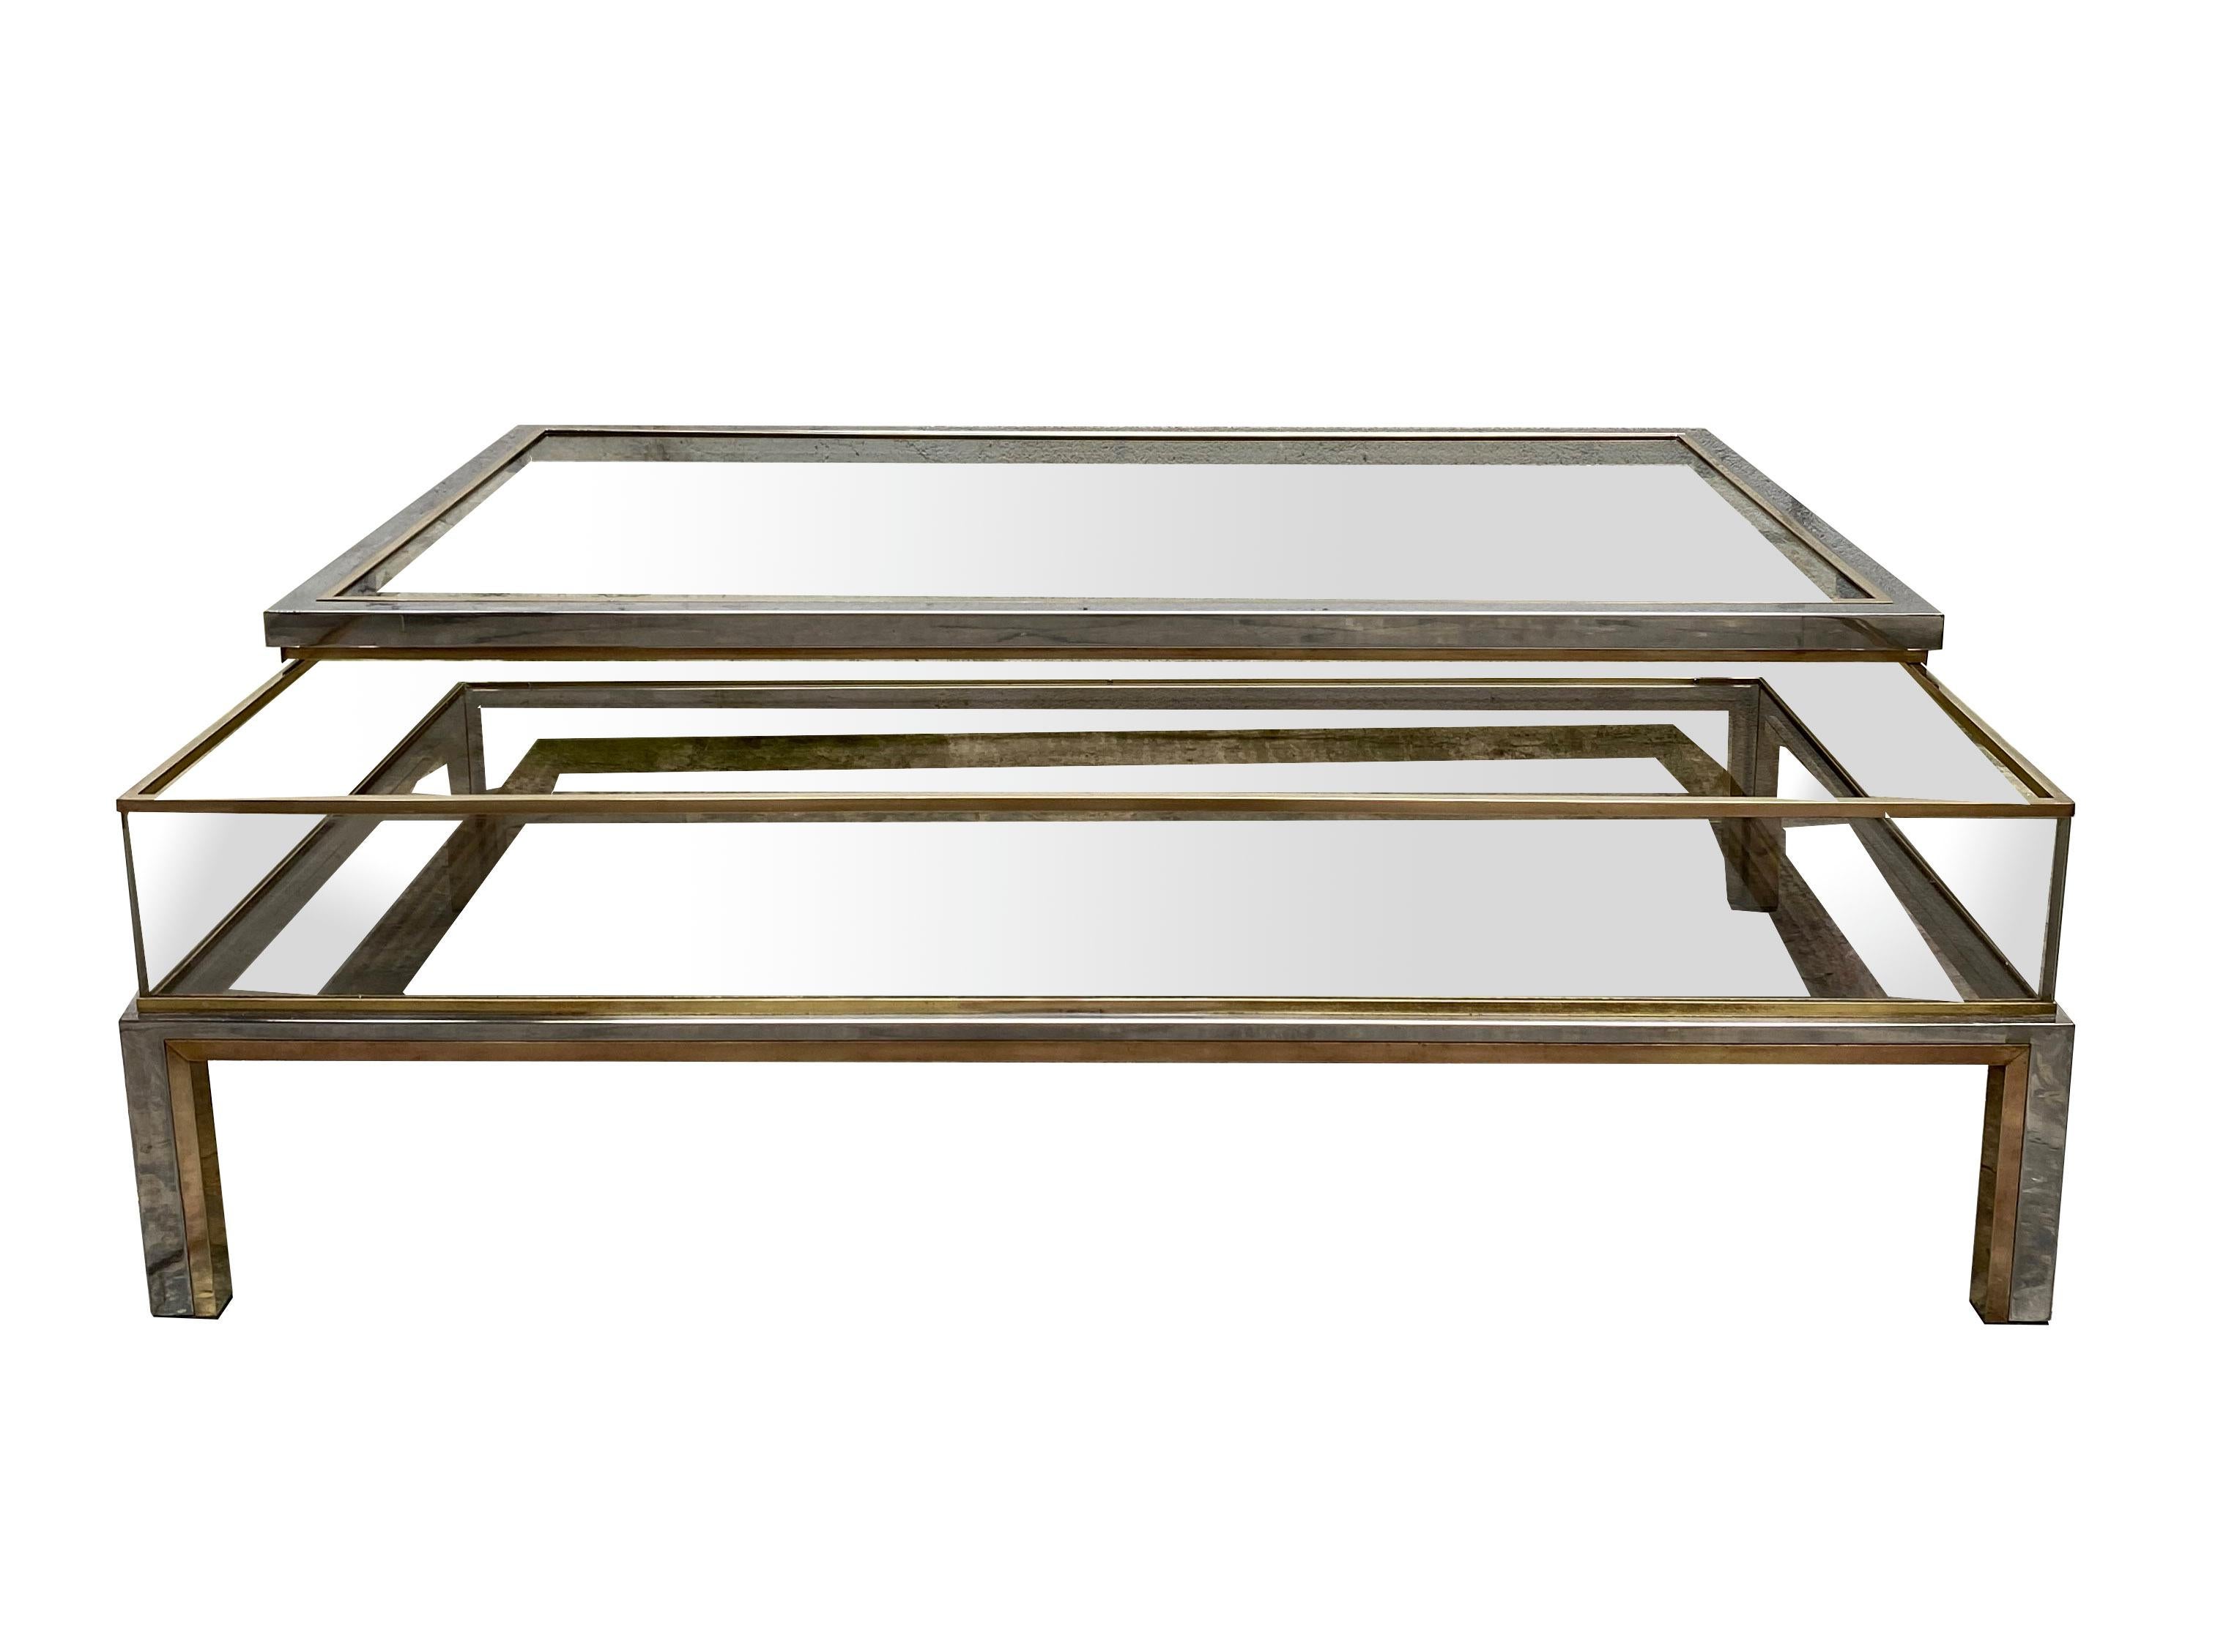 Brass, chrome-plated metal and glass coffee table/window, signed Romeo Rega. The top functions as a display case and opens on one side. Italy 1960.